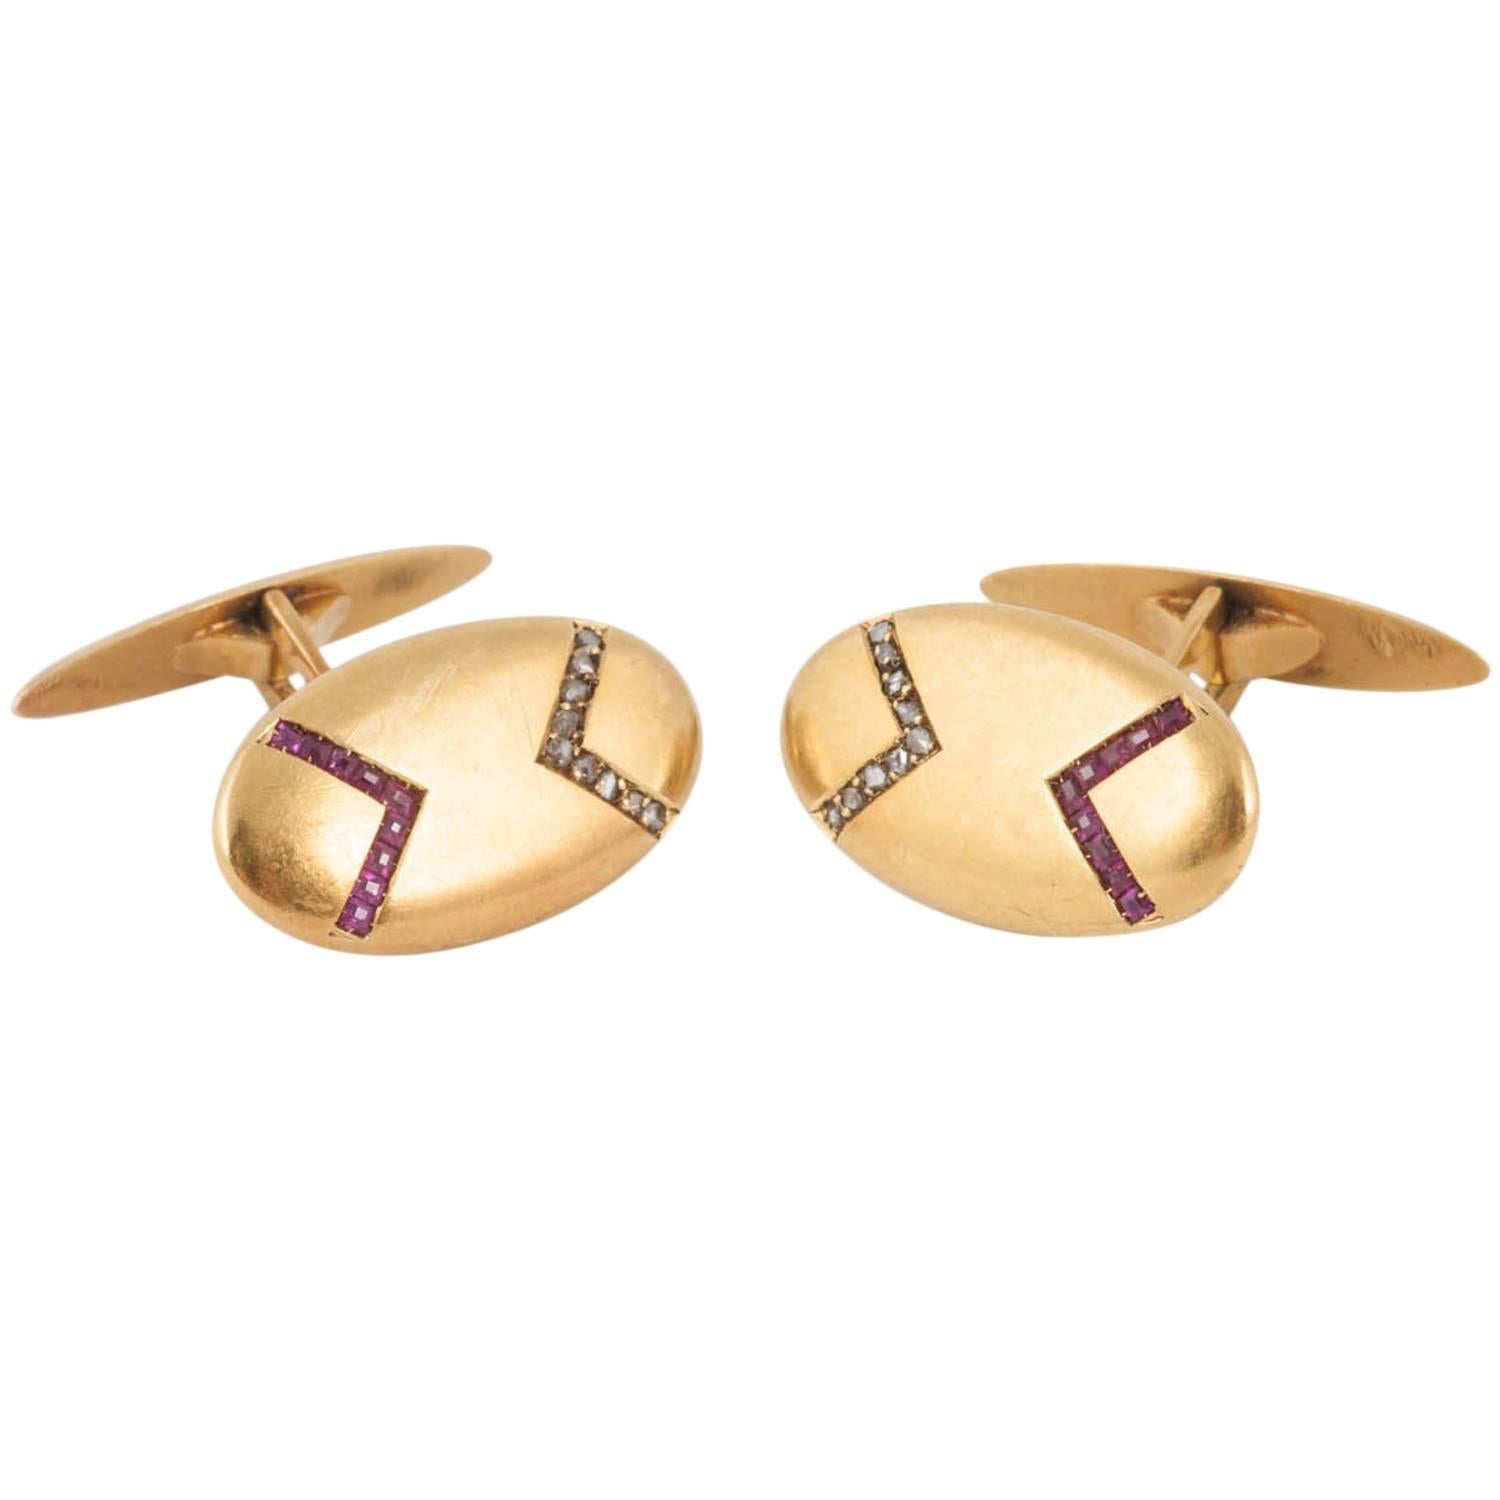 Cufflinks in 18 Karat Gold, Set Rubies and Rose Cut Diamonds, French circa 1890 For Sale